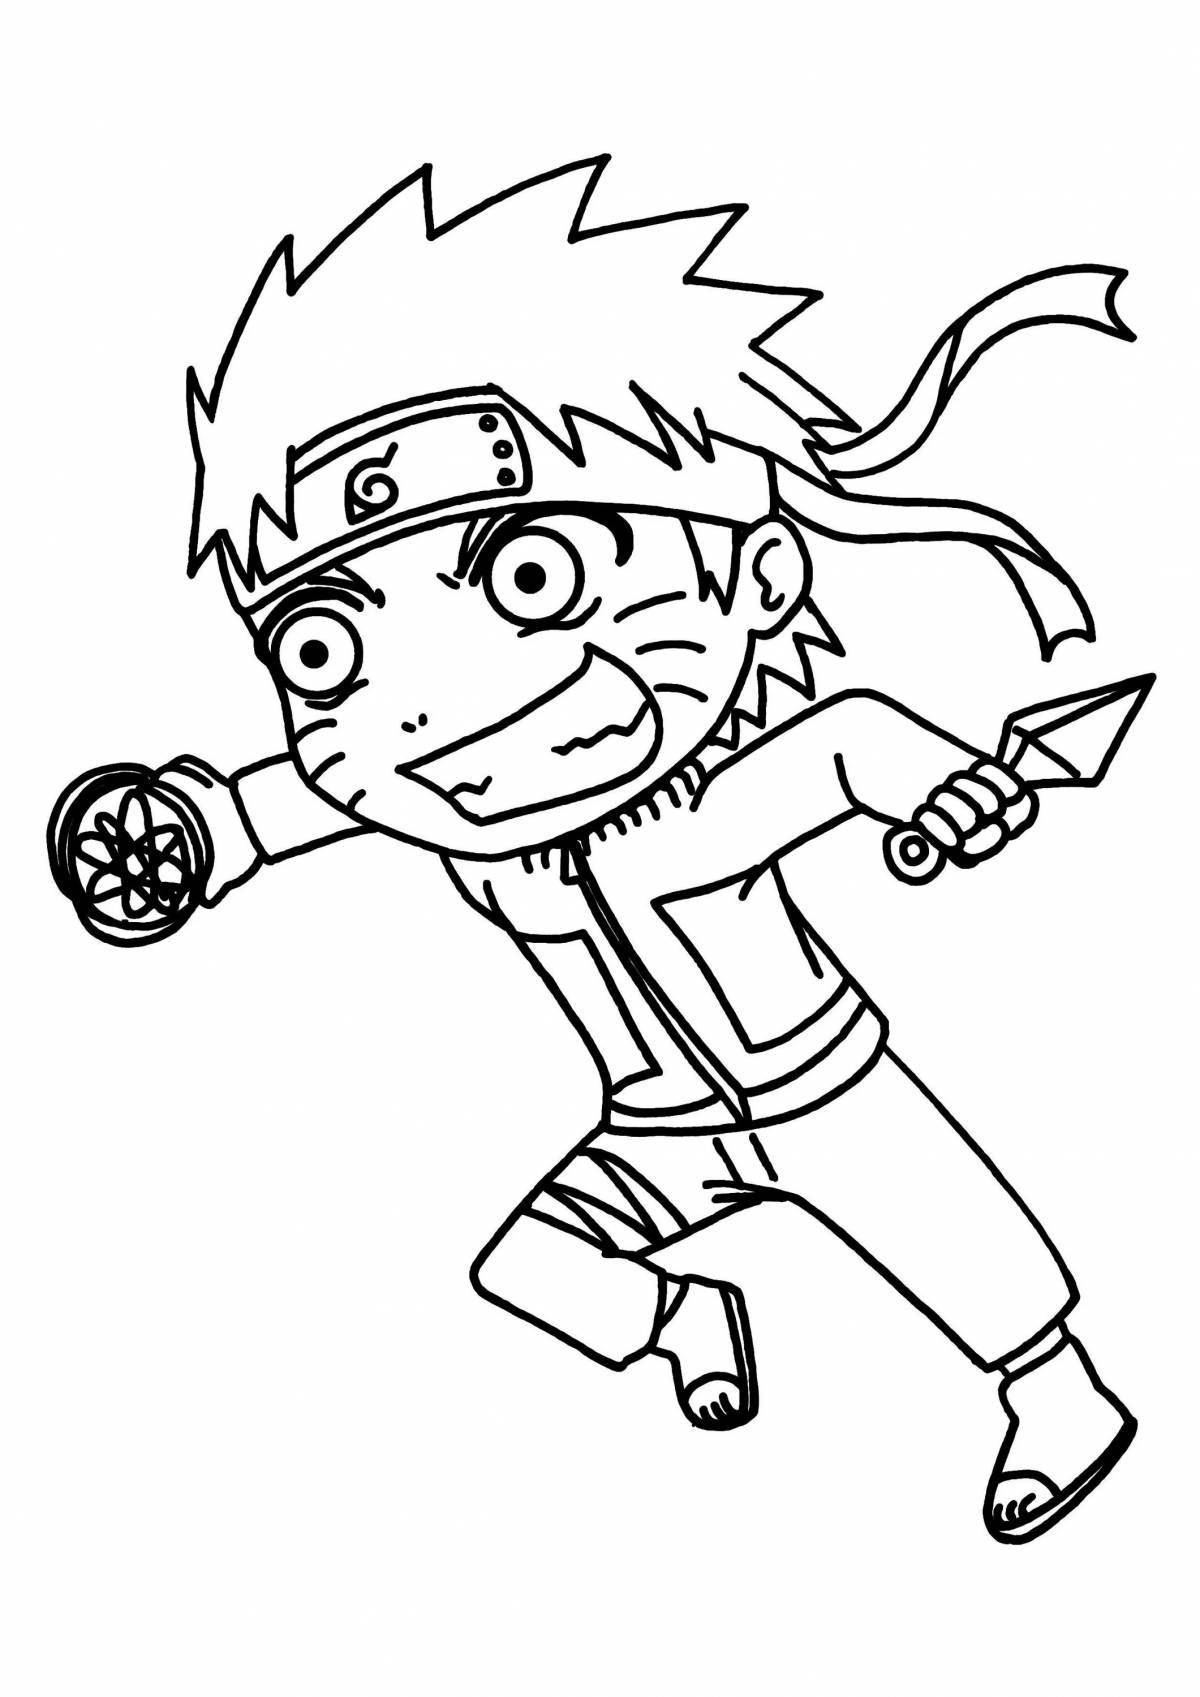 Exciting naruto coloring book for boys